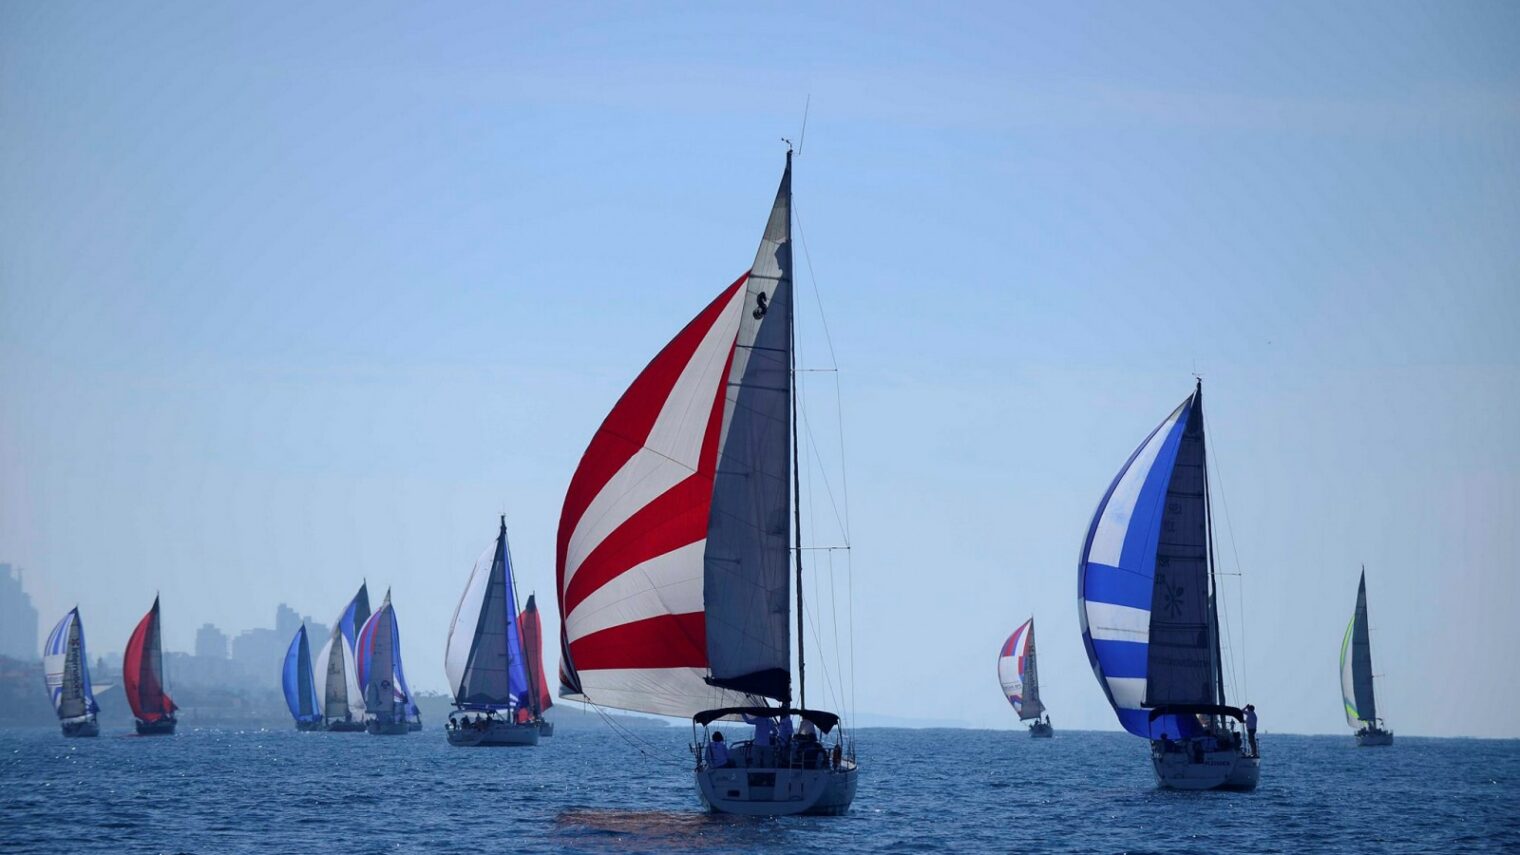 Sailing crews take part in the Israel Sailing Competition near Tel Aviv. Photo by Tomer Neuberg/Flash90